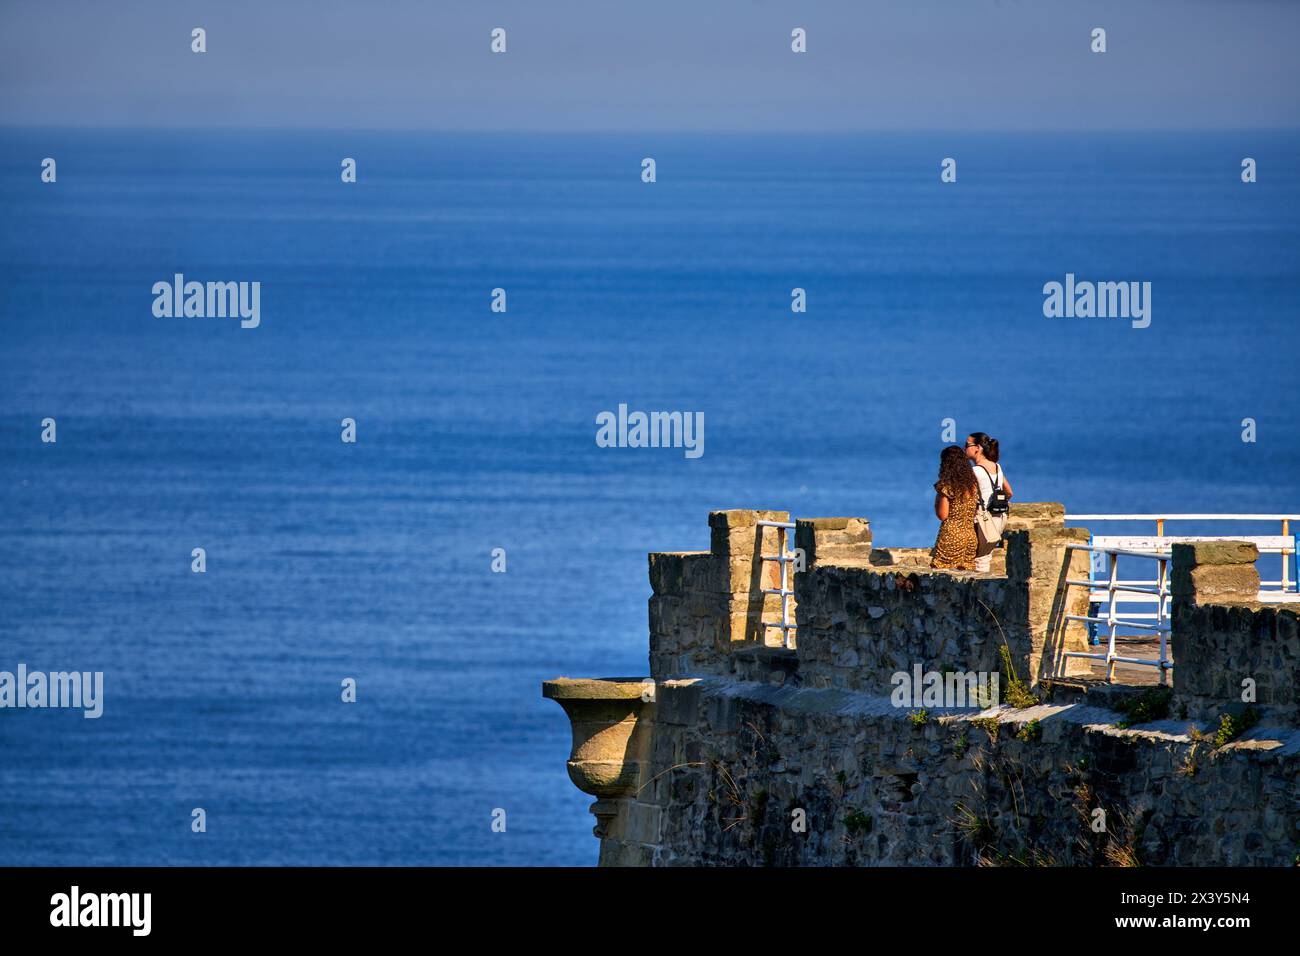 Viewpoint in the Battery of the Ladies, Cantabrian Sea, Donostia, San Sebastian, cosmopolitan city of 187,000 inhabitants, noted for its gastronomy, u Stock Photo